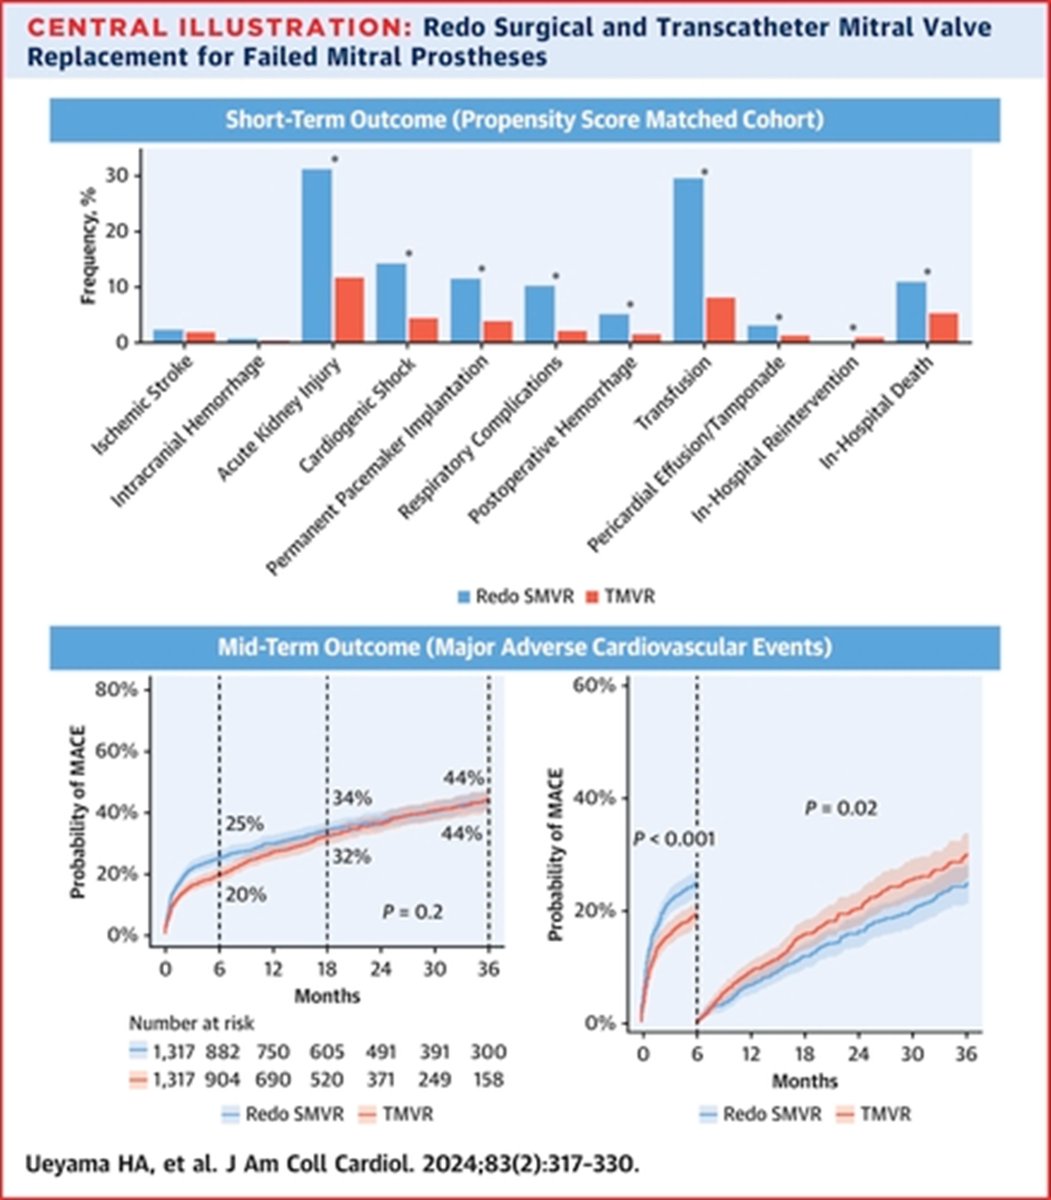 In #JACC, @mw_sherwood @anvoramd provide perspective & context for results of analysis by Ueyama et al of data on reoperation vs TMVR in patients with failed mitral prostheses jacc.org/doi/10.1016/j.… jacc.org/doi/10.1016/j.…